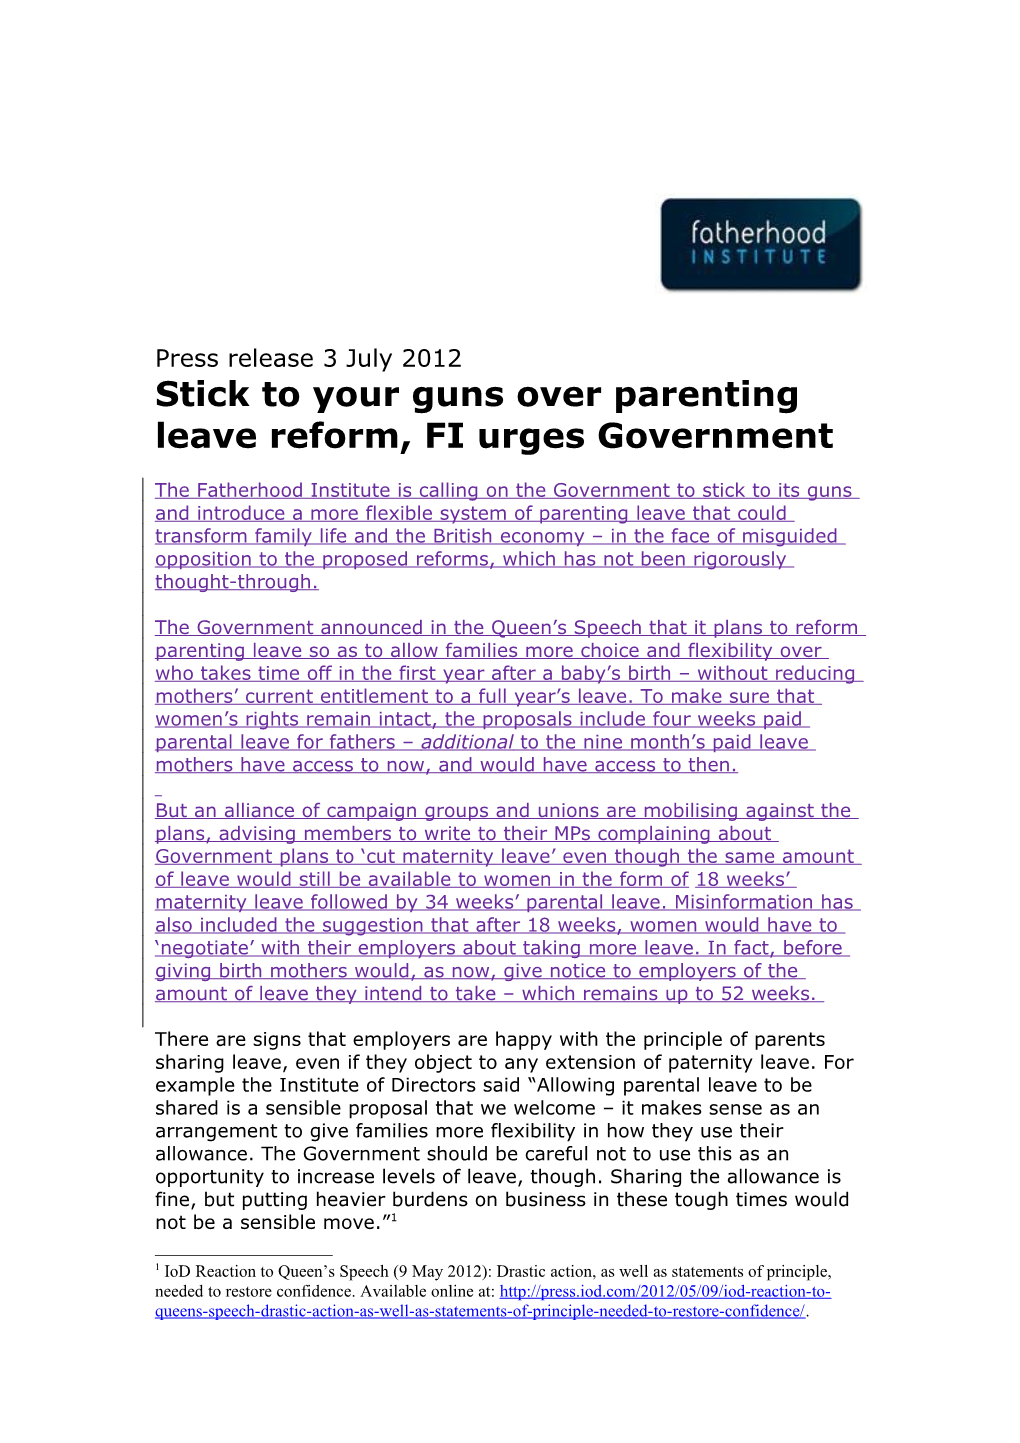 The Fatherhood Institute Is Calling on the Government to Stick to Its Guns and Introduce